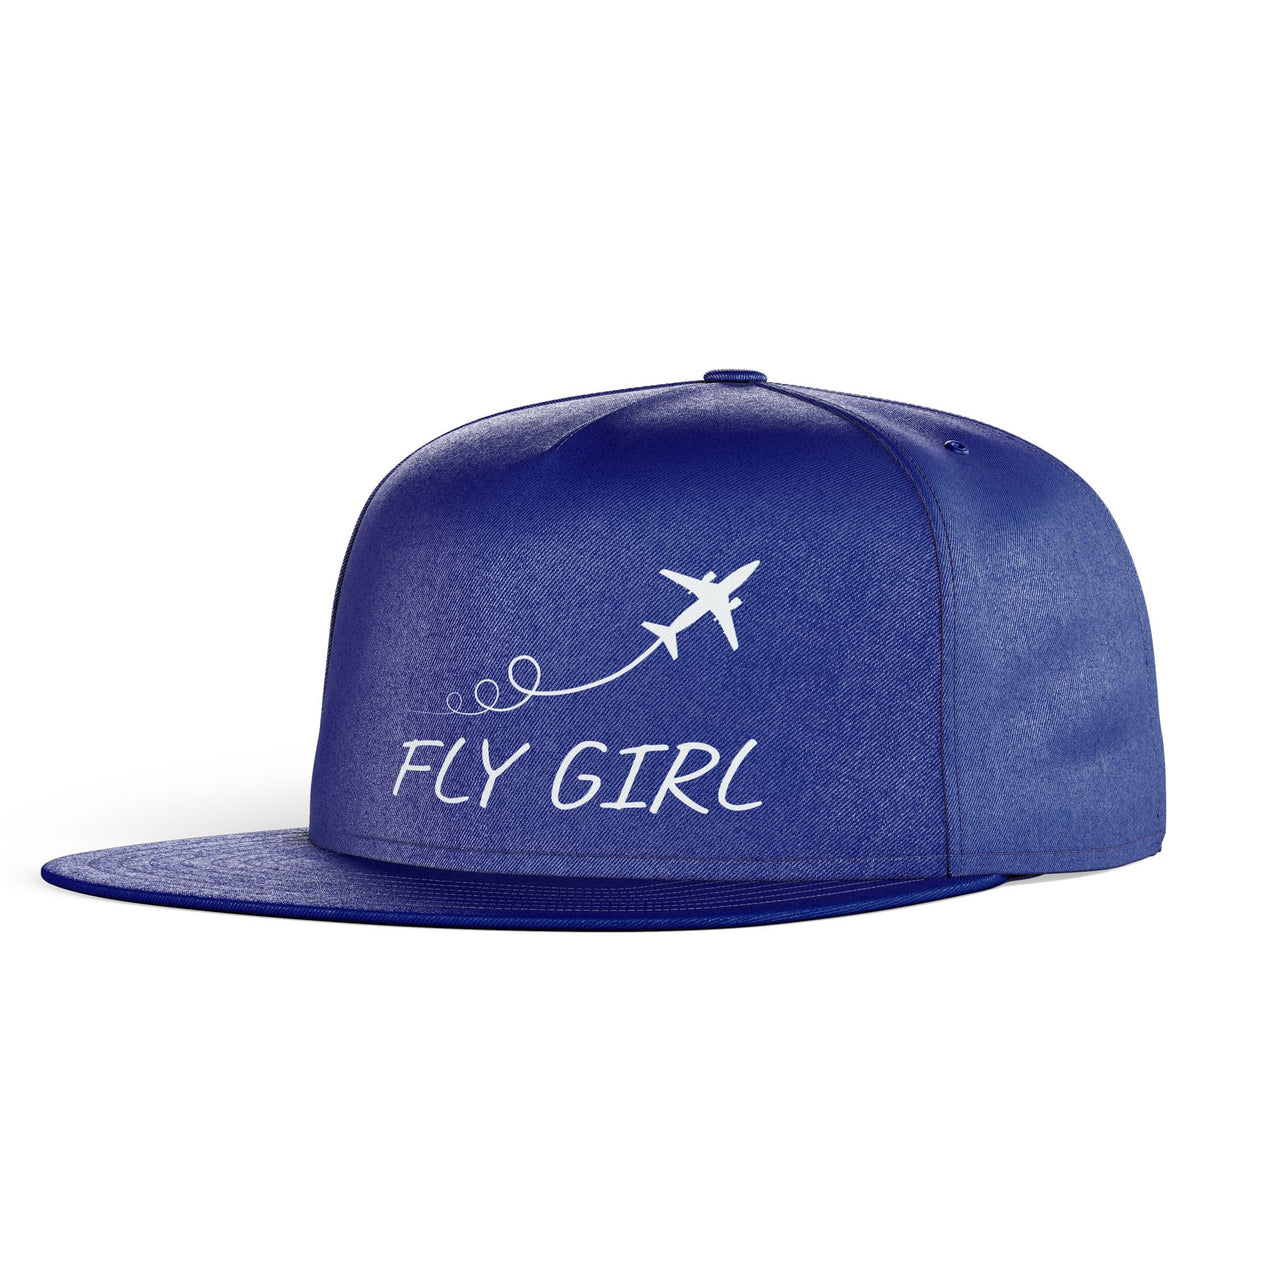 Just Fly It & Fly Girl Designed Snapback Caps & Hats